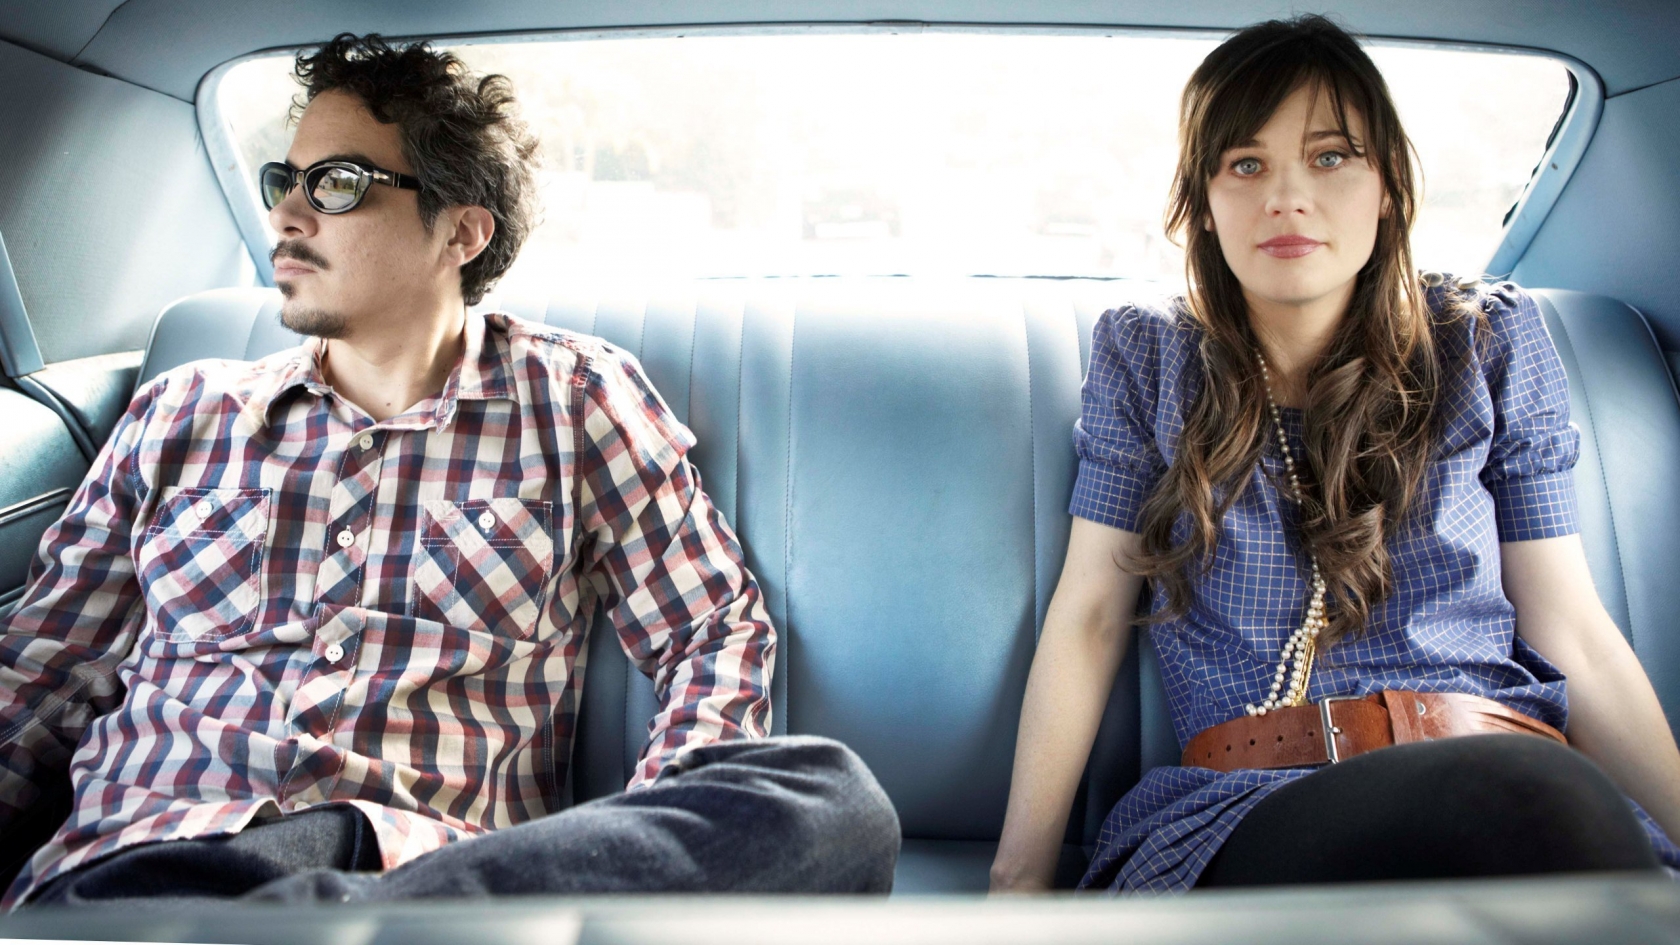 She and Him Band for 1680 x 945 HDTV resolution